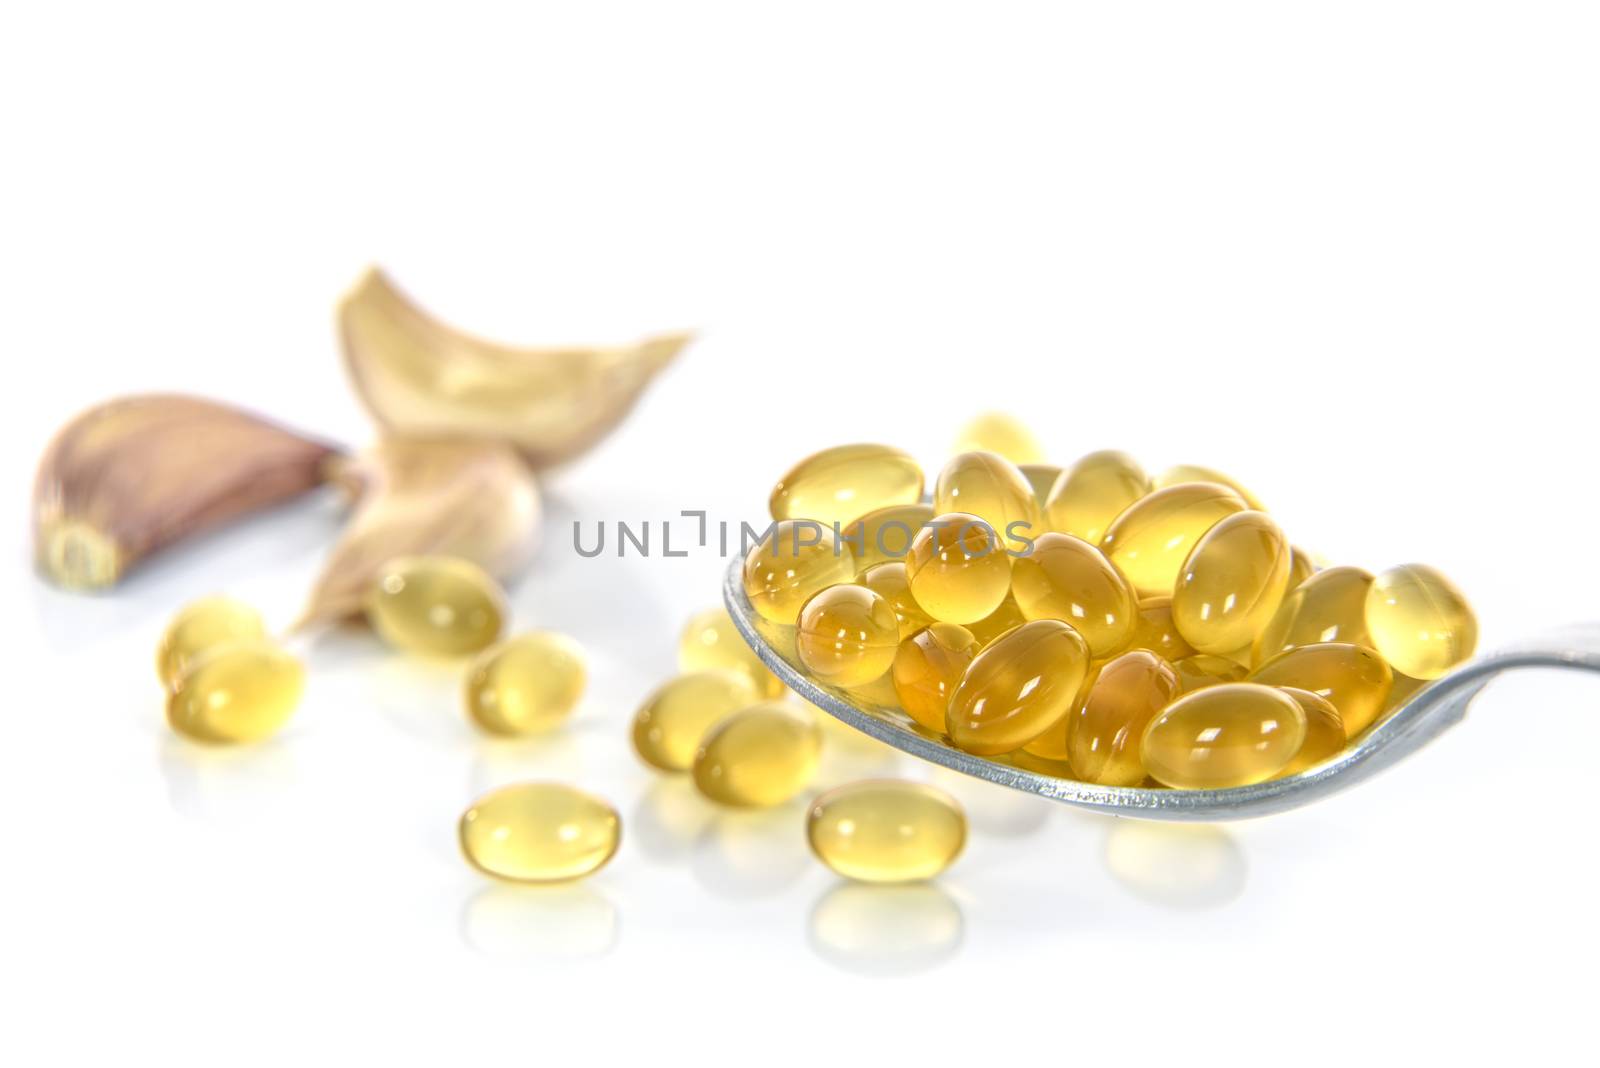 Garlic oil capsules with garlic cloves isolated on white background 